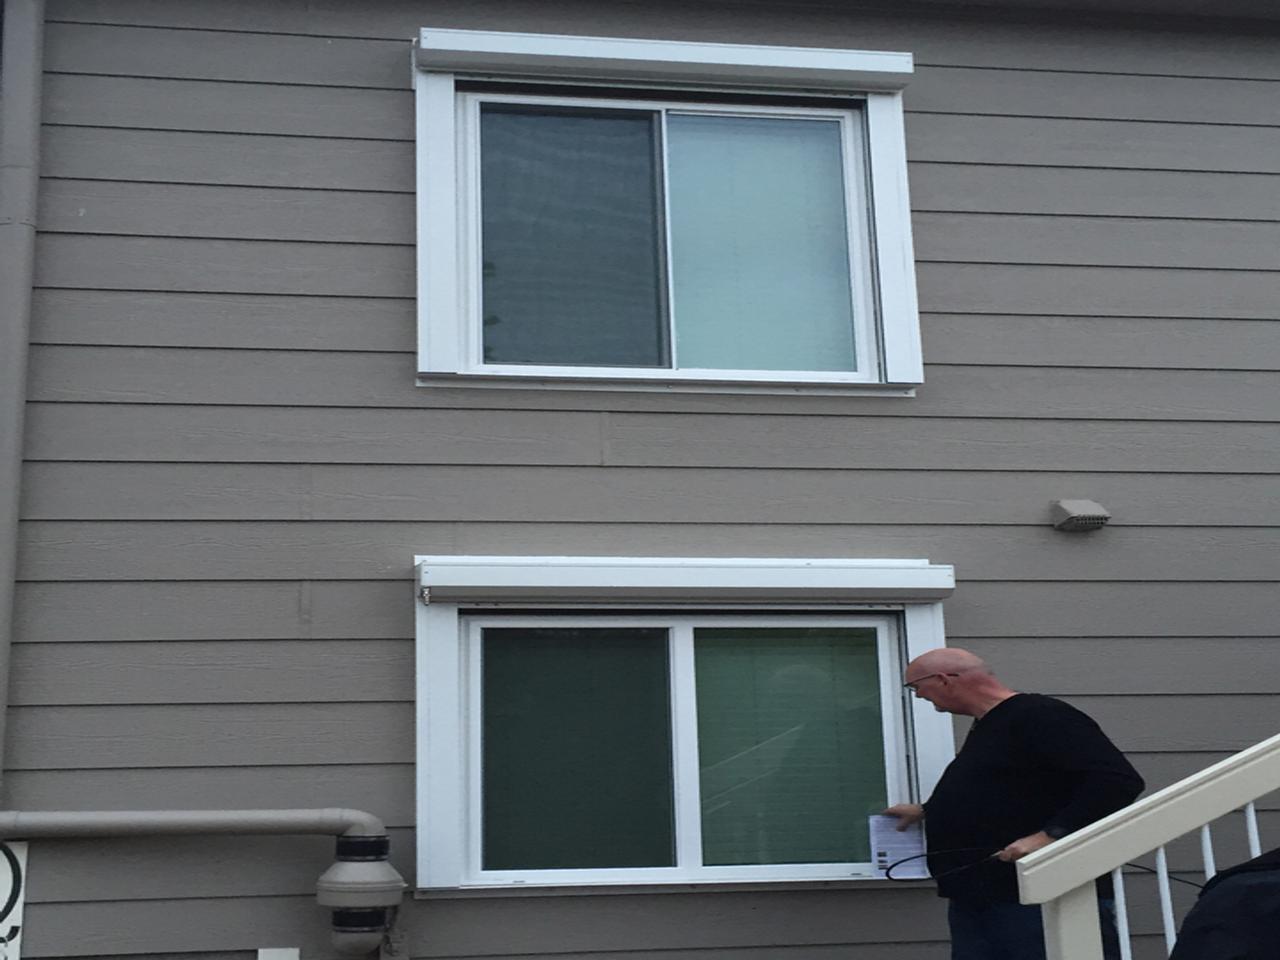 Installing hurricane shutters on a house